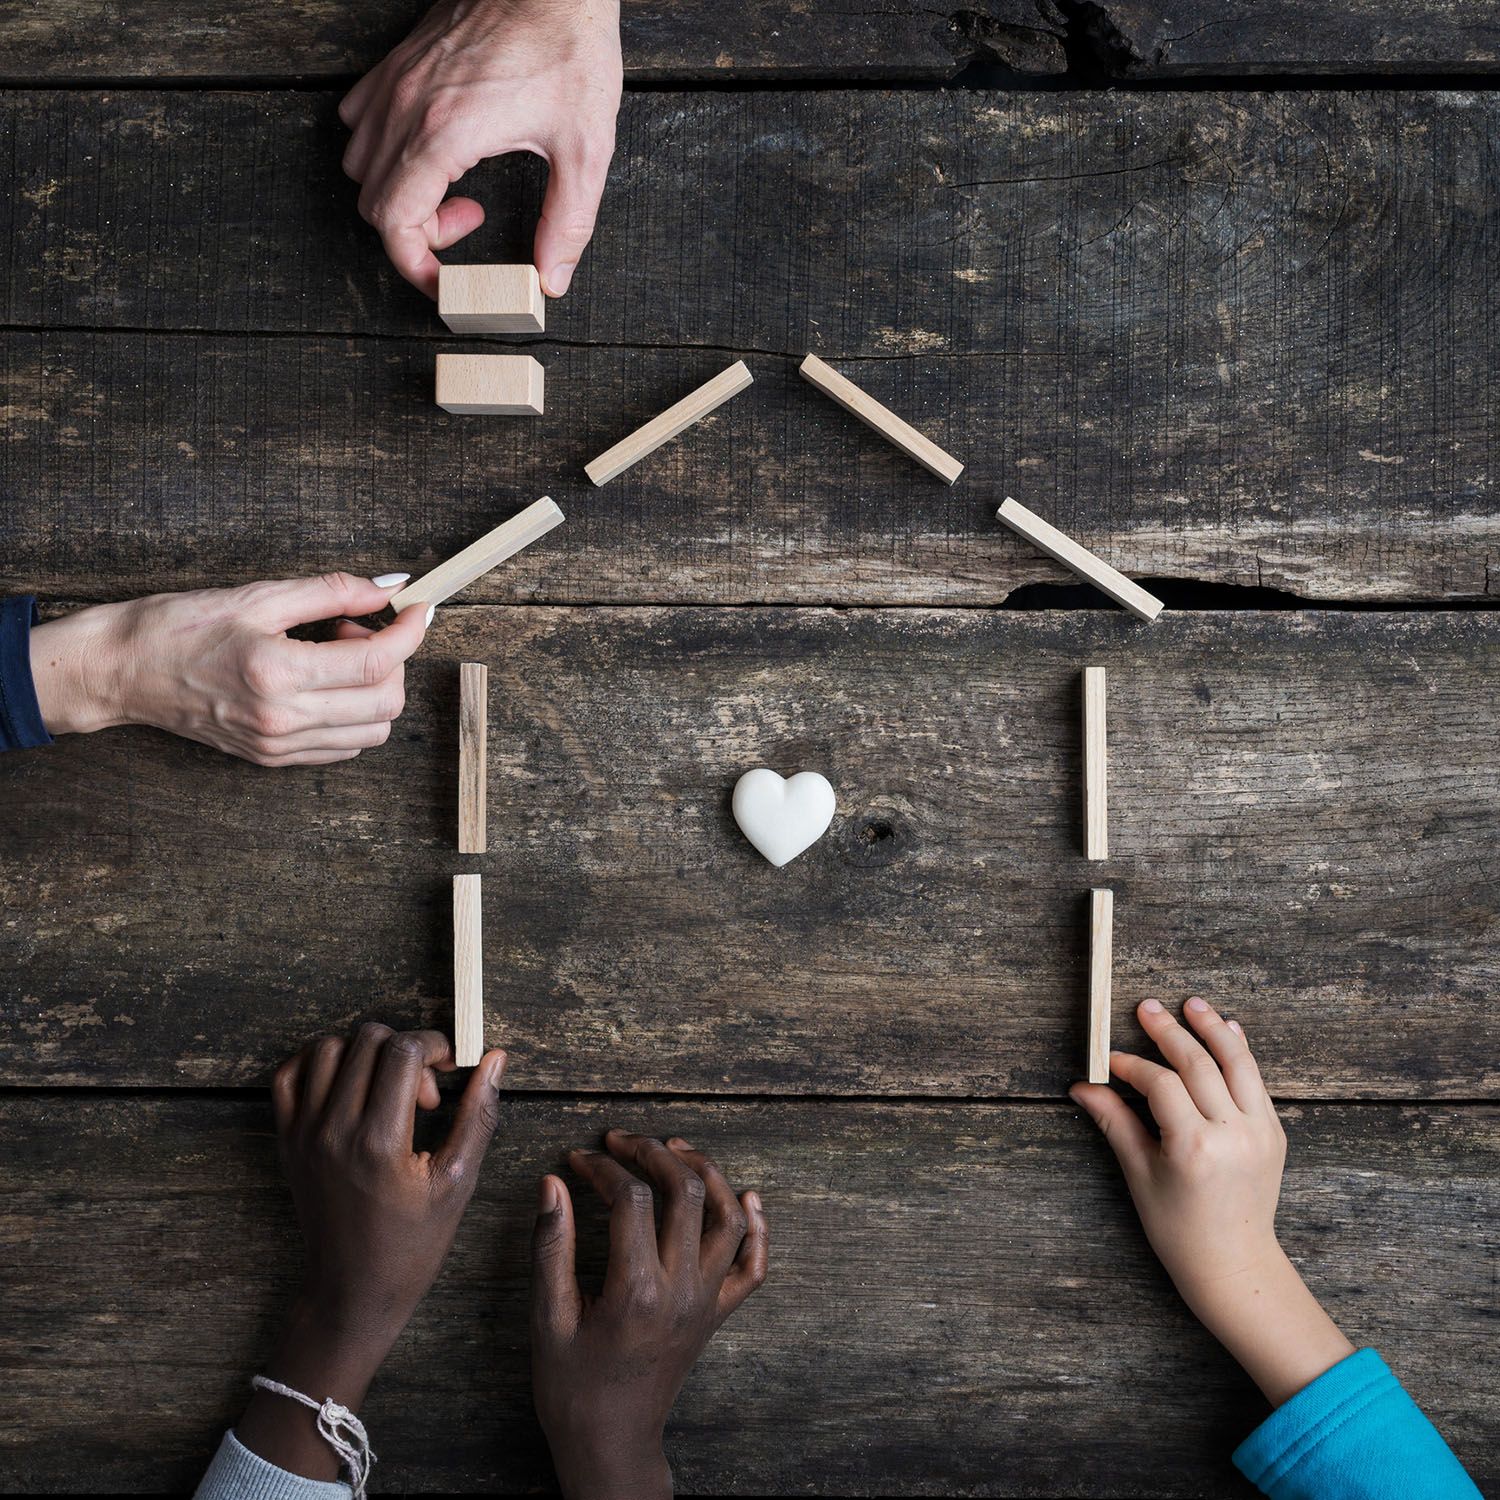 family of four constructing a small wooden home with a heart in the center